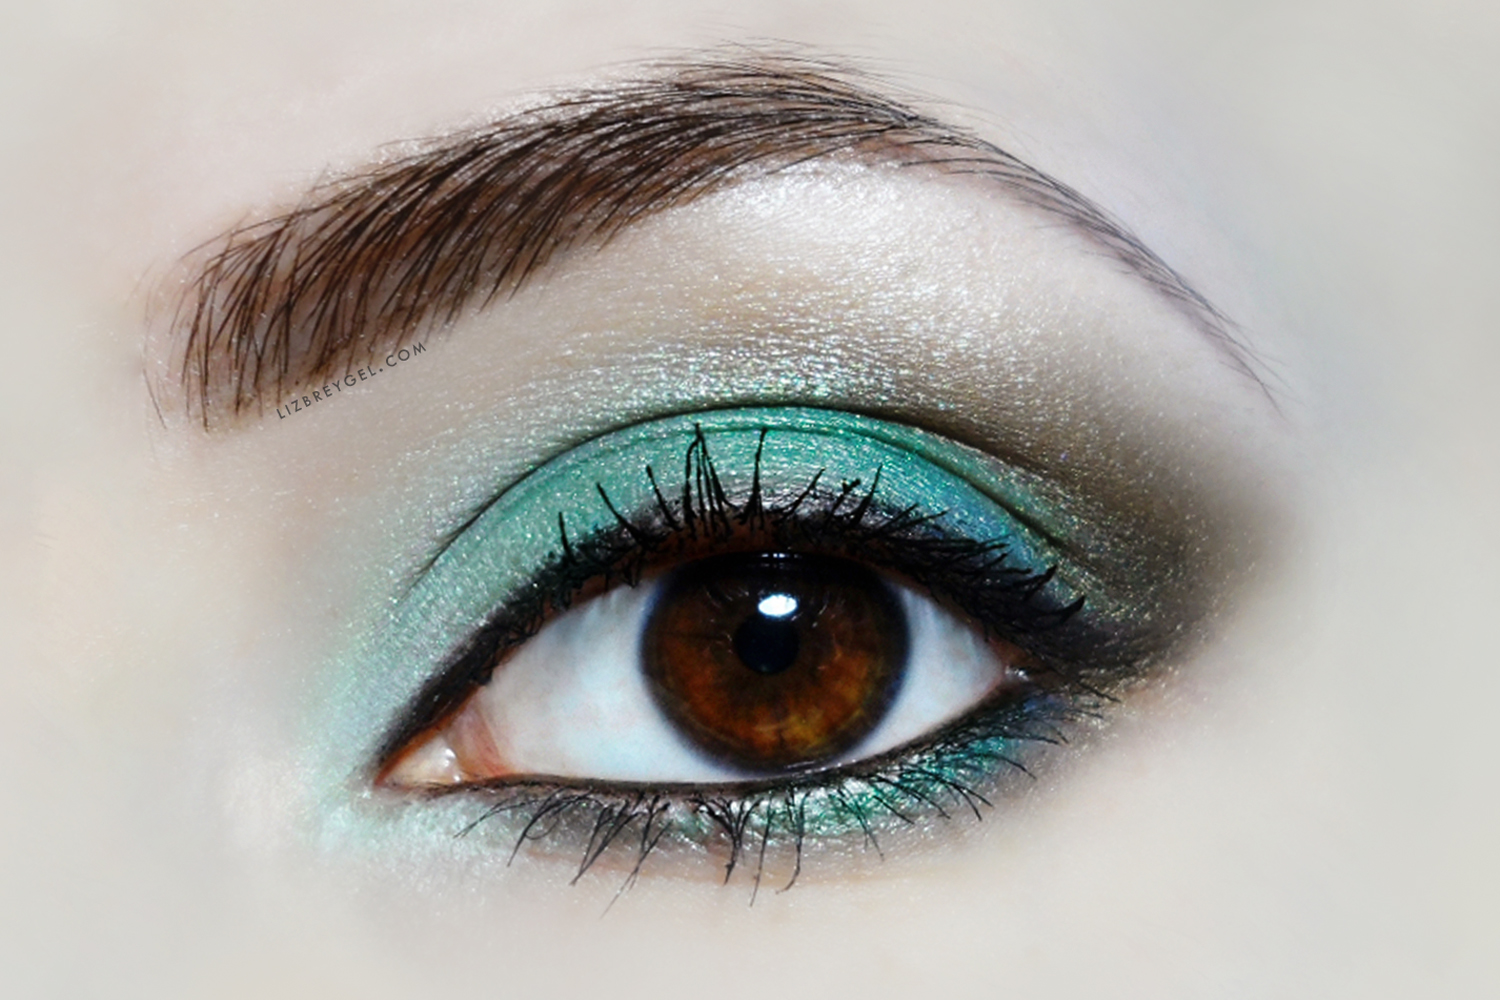 a clo-up look of an eye with dramatic makeup